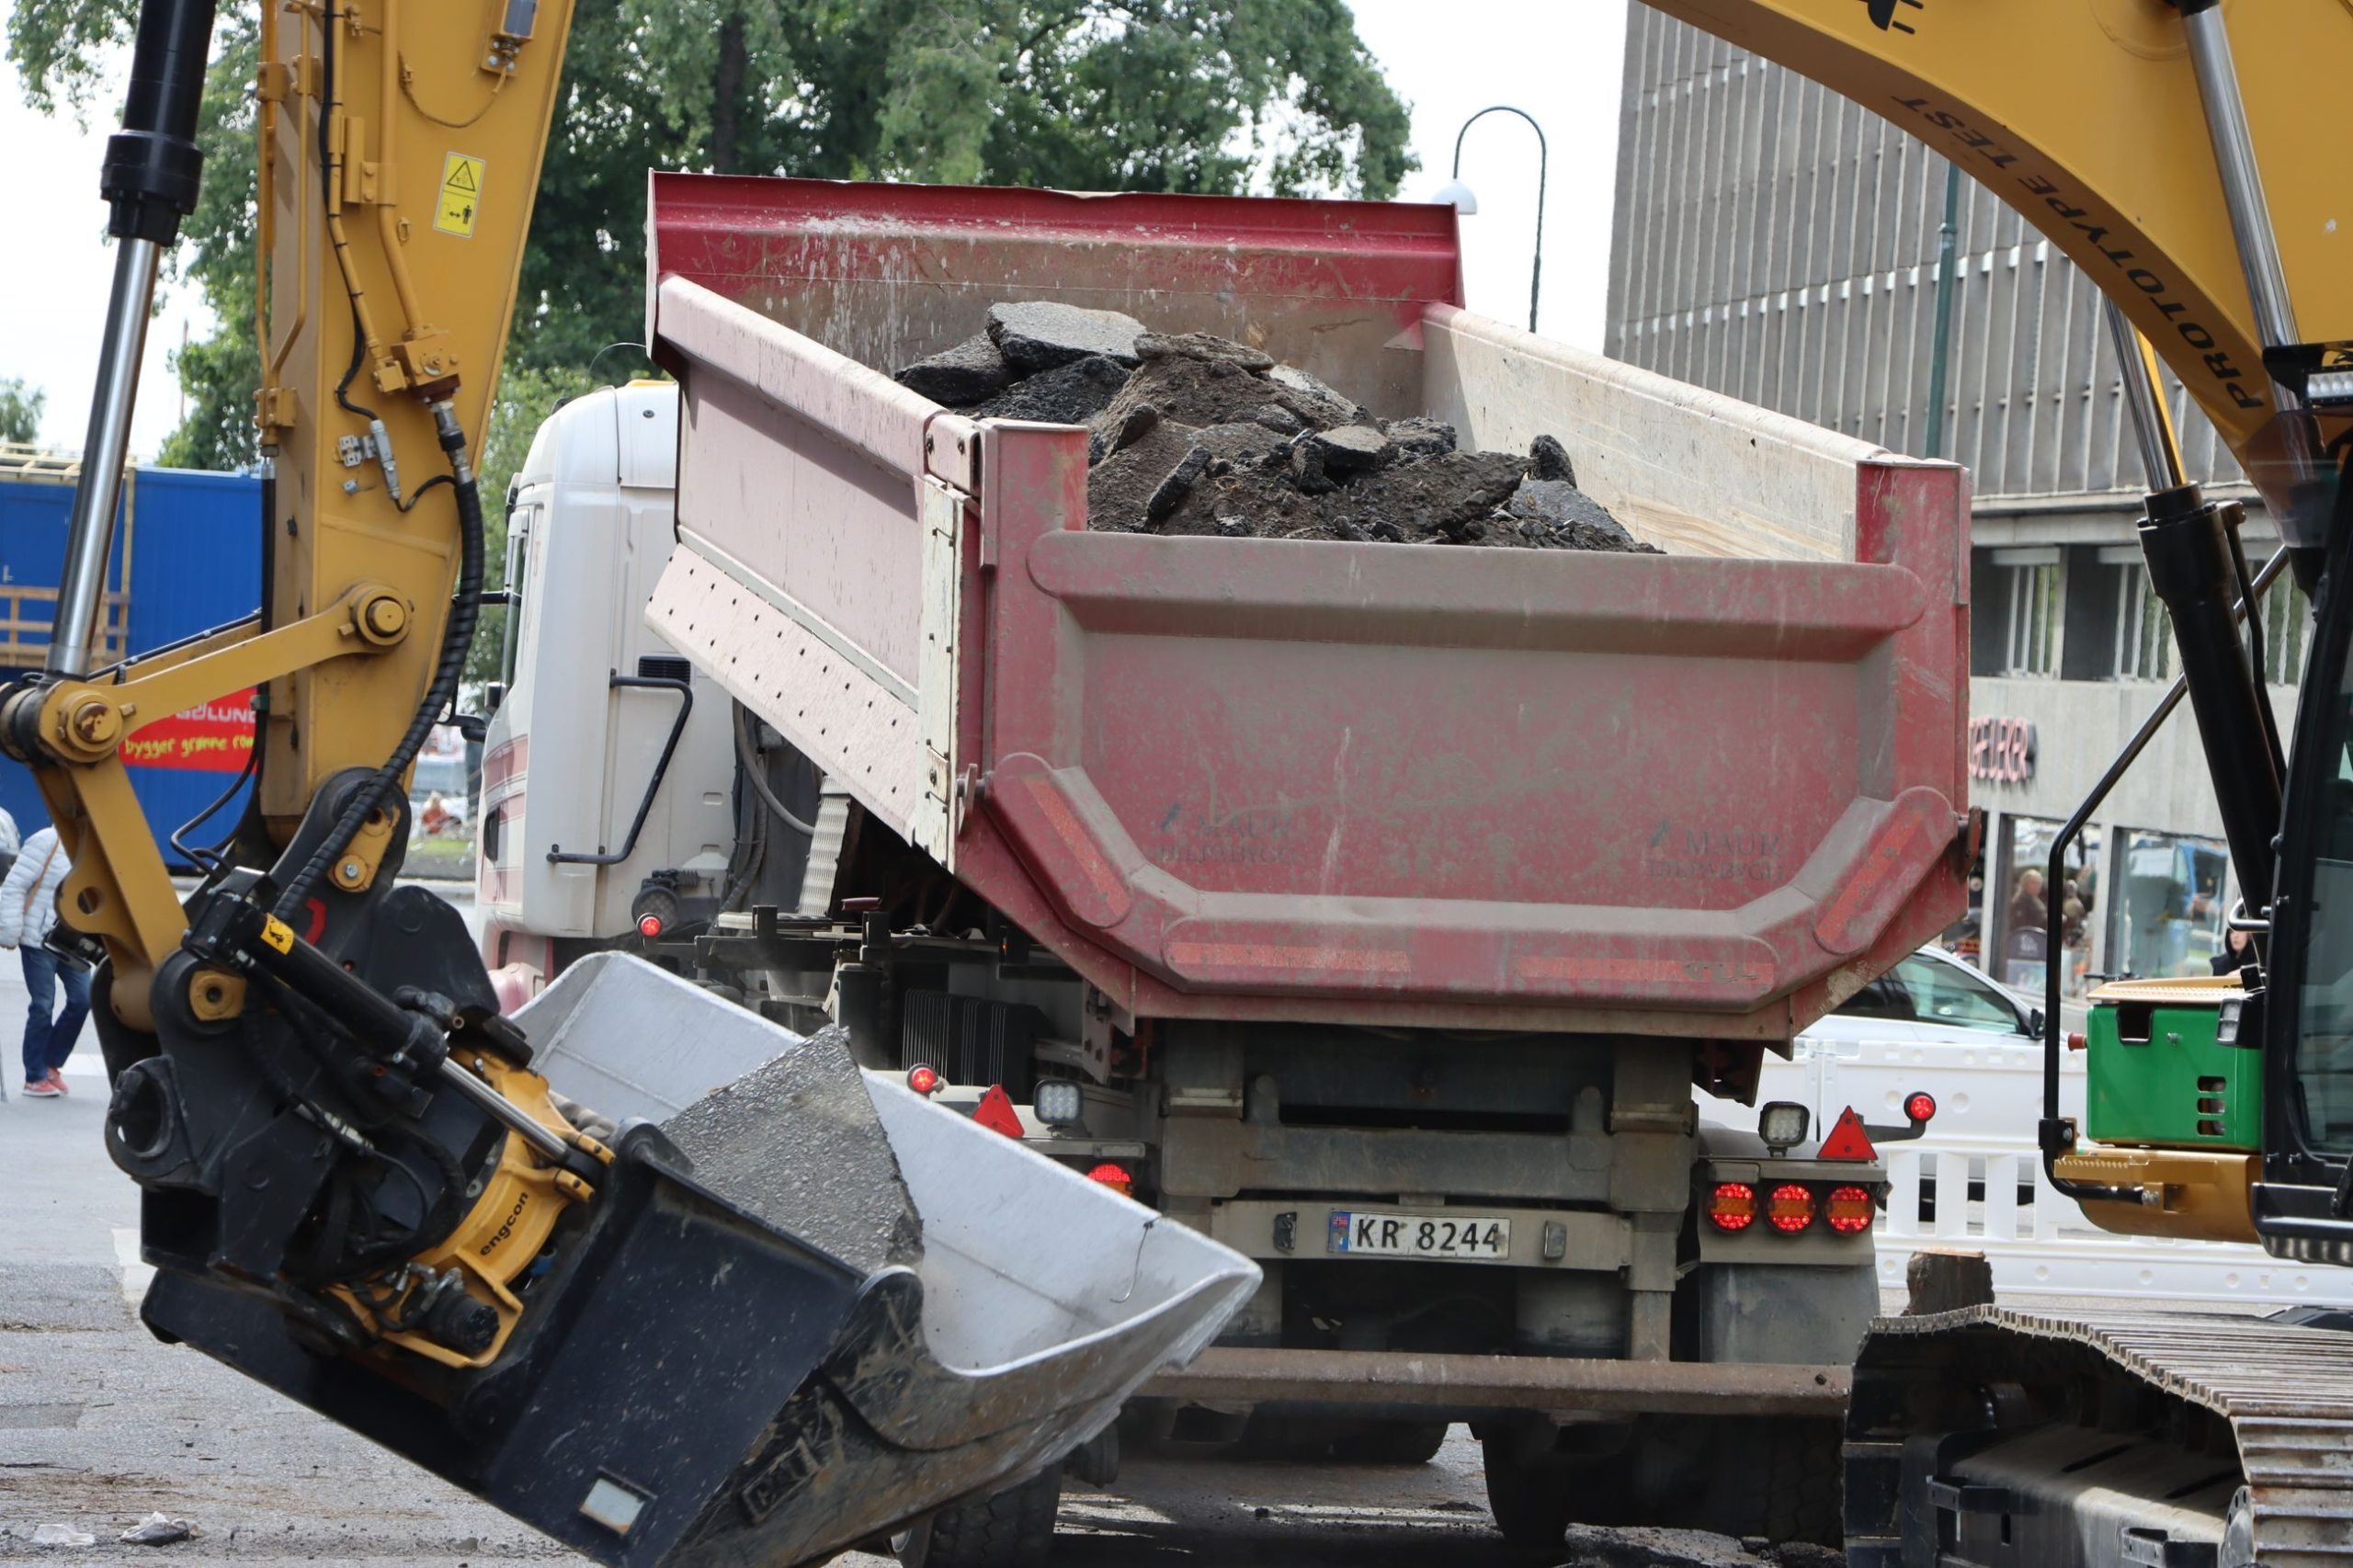 Oslo's climate budget: Transport and management of bulk materials